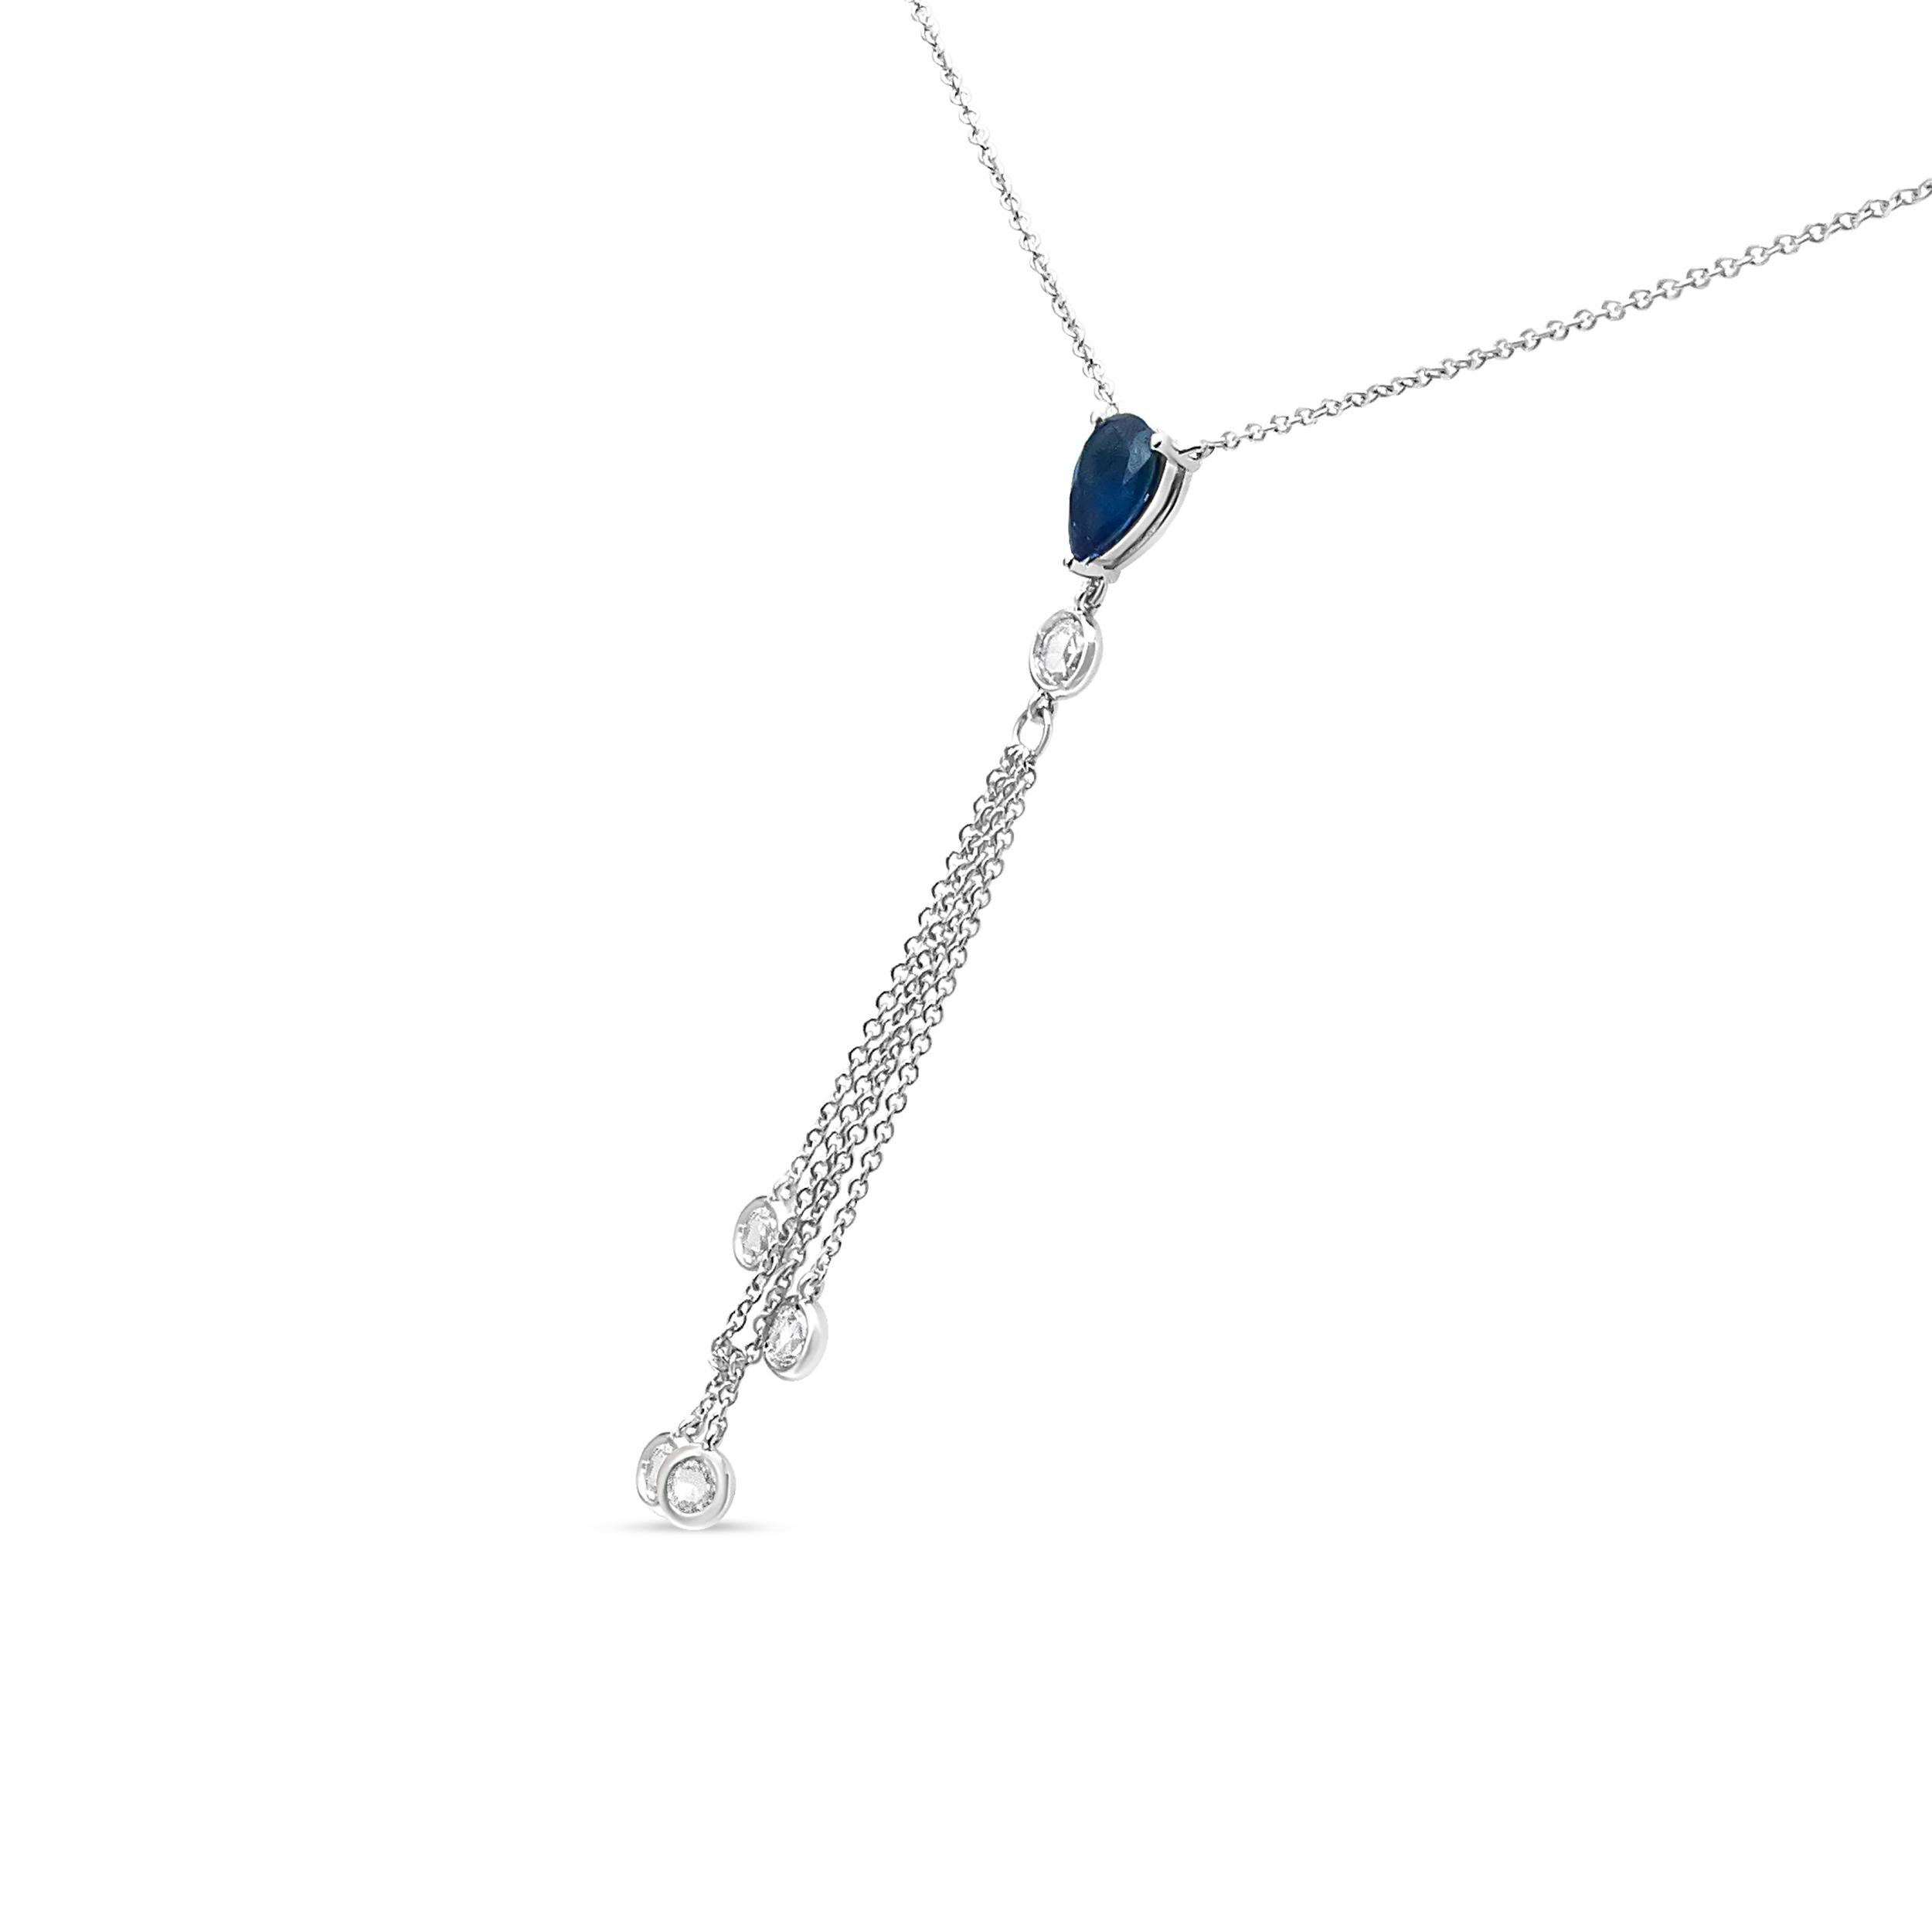 Contemporary 18K White Gold 3/8 Carat Diamond and Blue Sapphire Waterfall Dangle Y Necklace